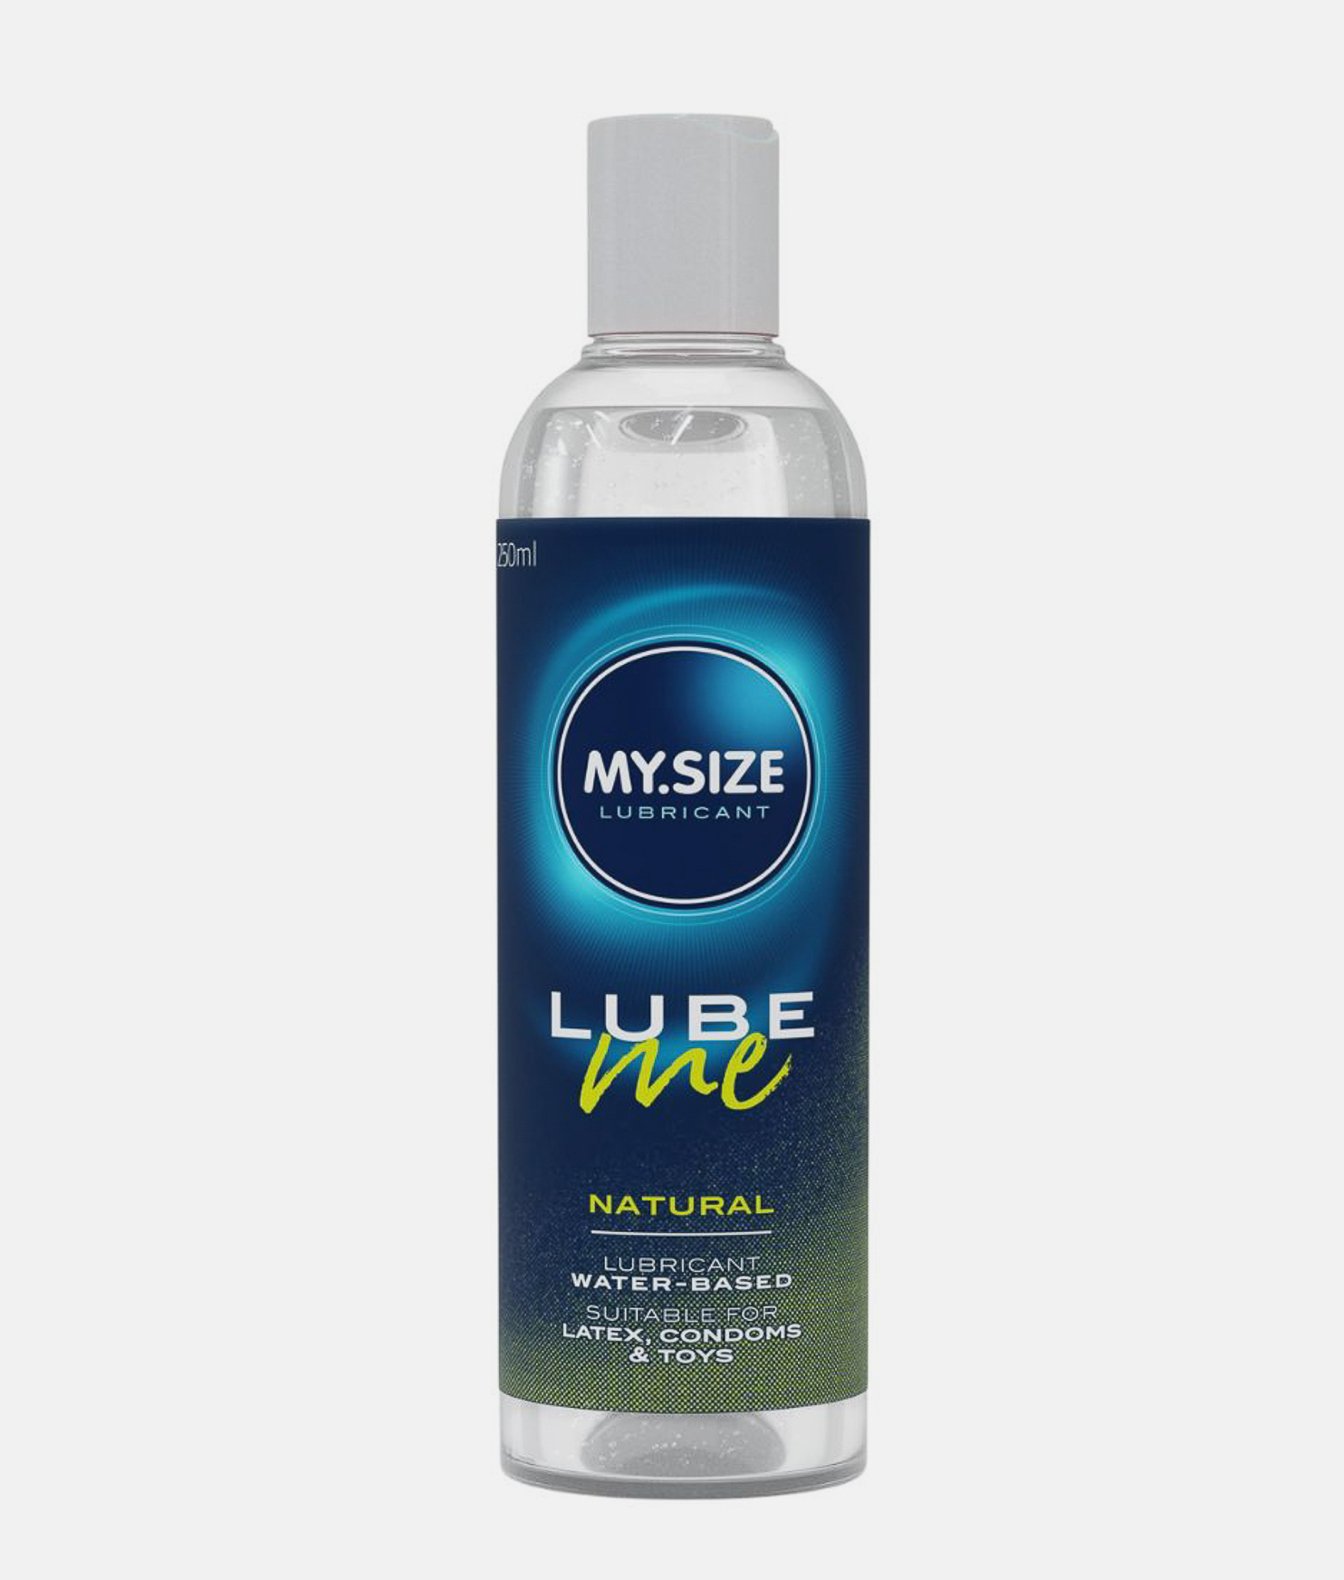 MY.SIZE Lube Me Natural żel intymny naturalny